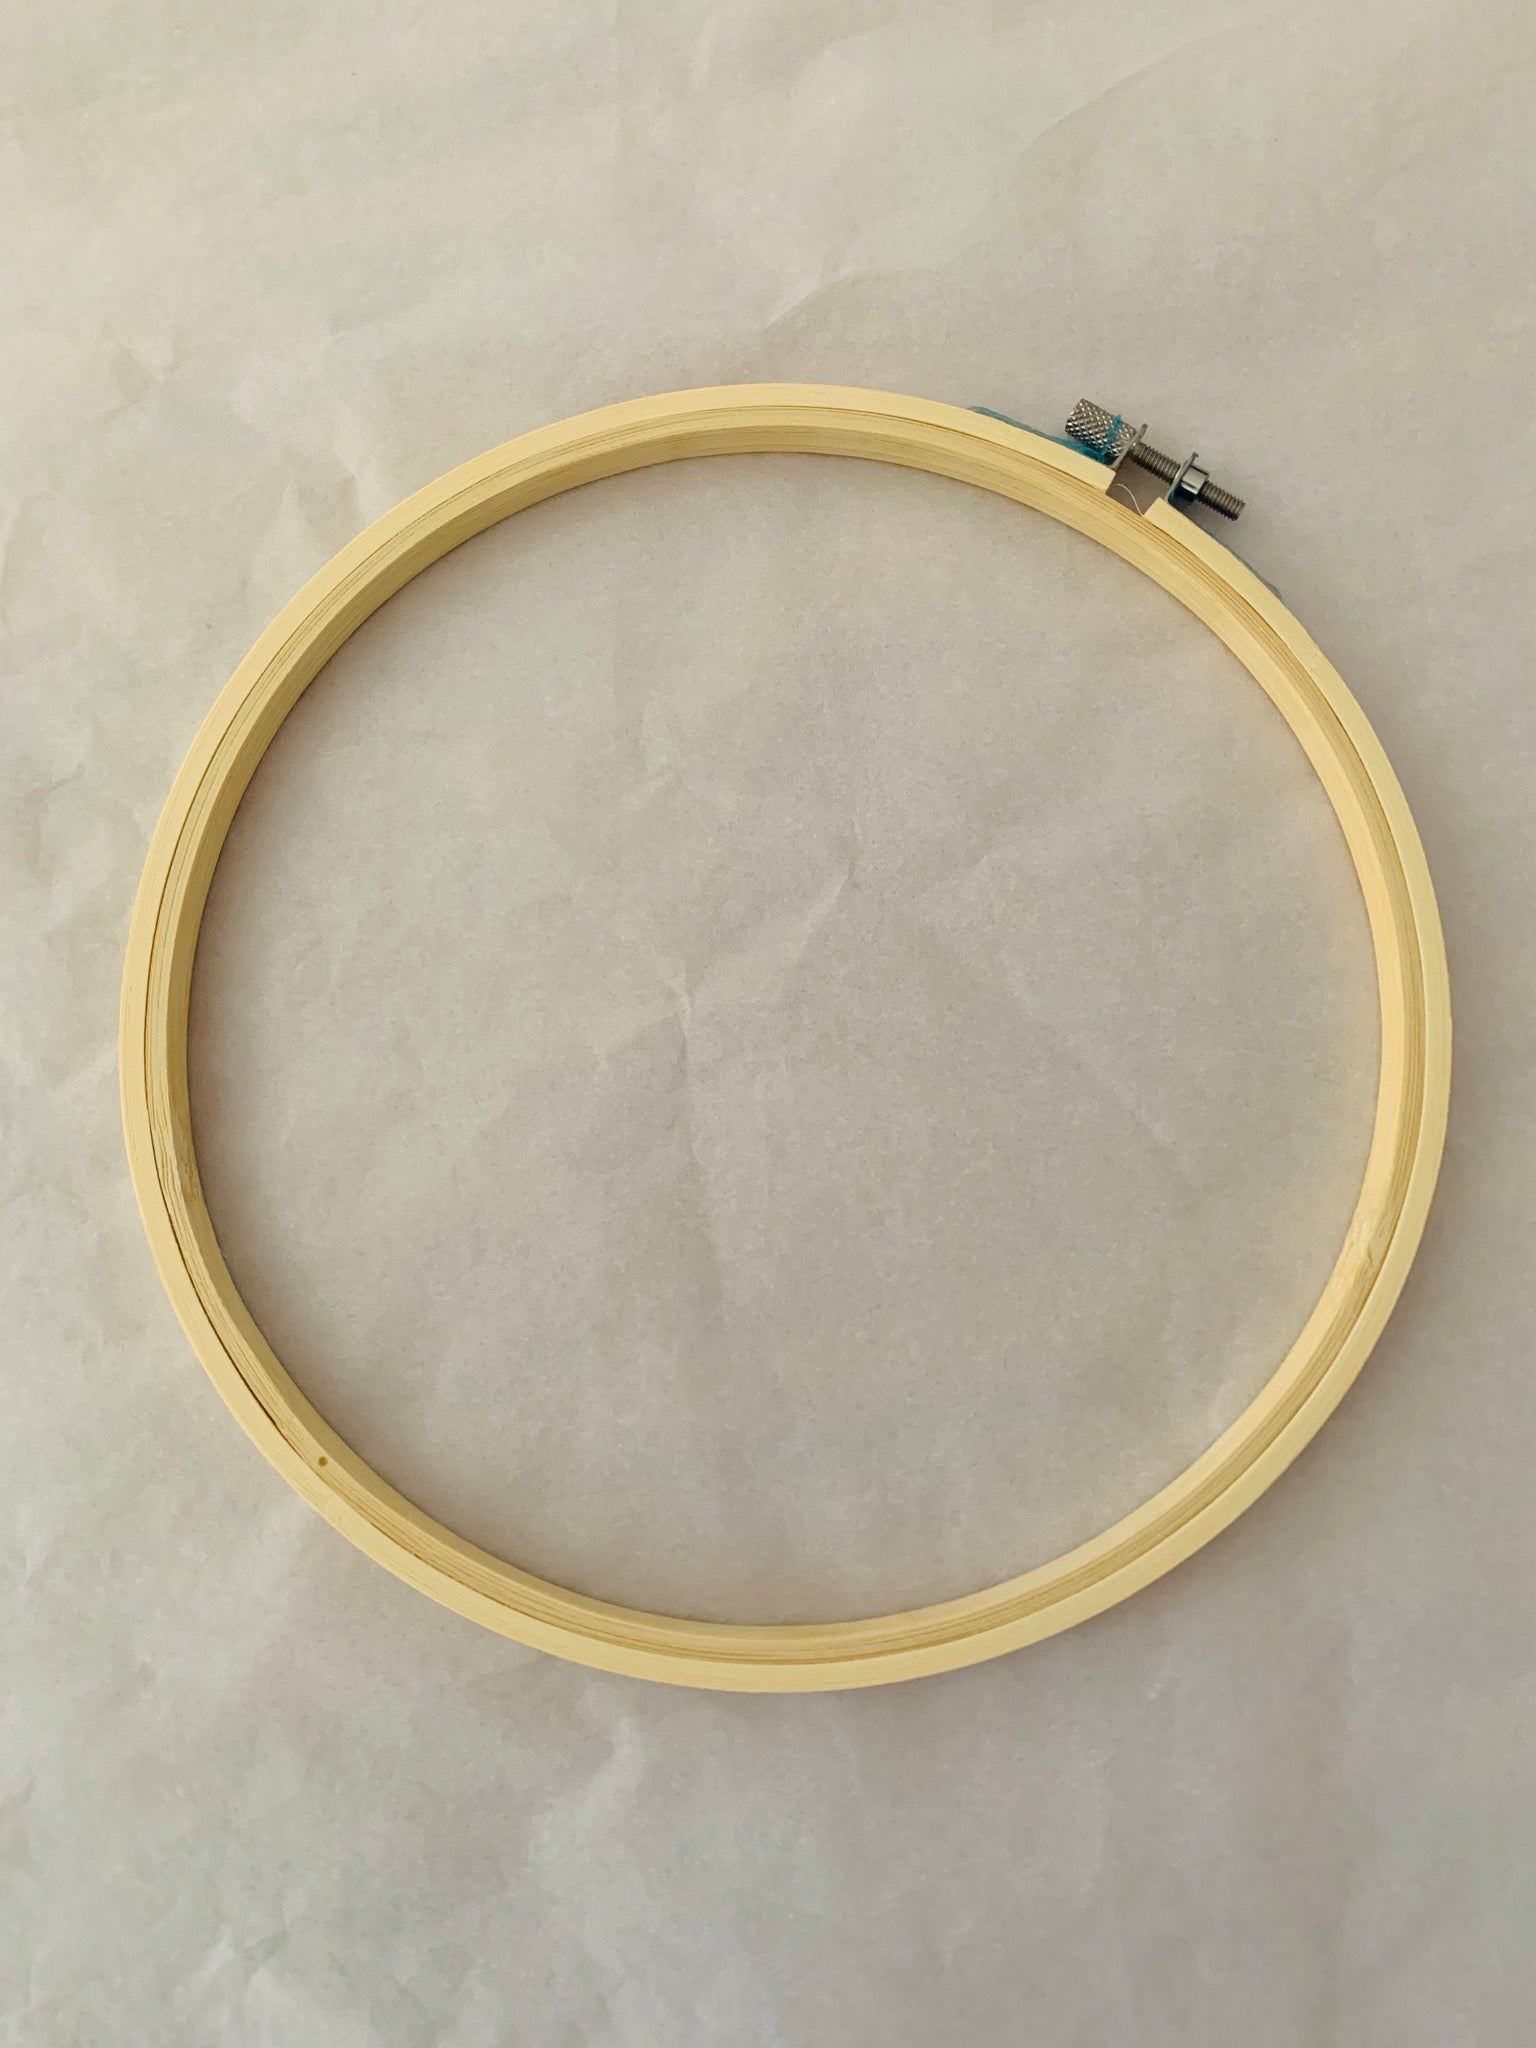 Large bamboo embroidery hoop 8”